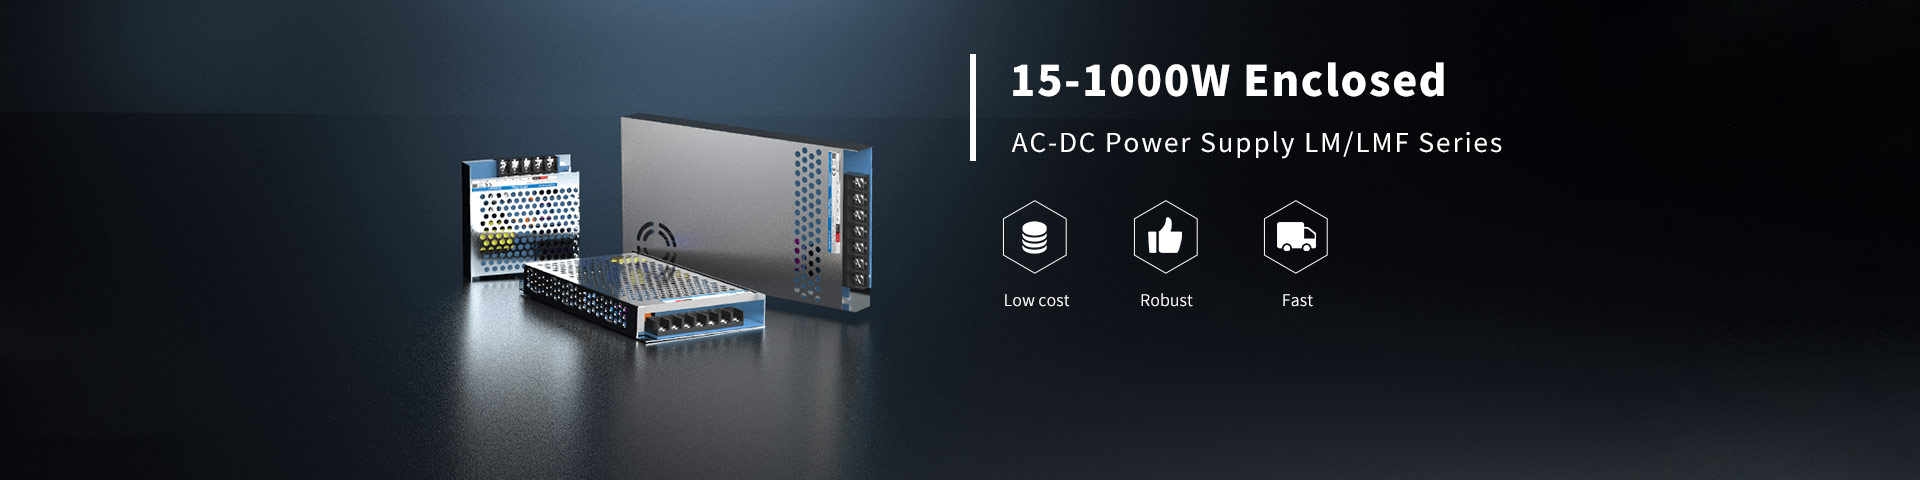 15-1000W enclosed switching power supply LM/LMF SMPS